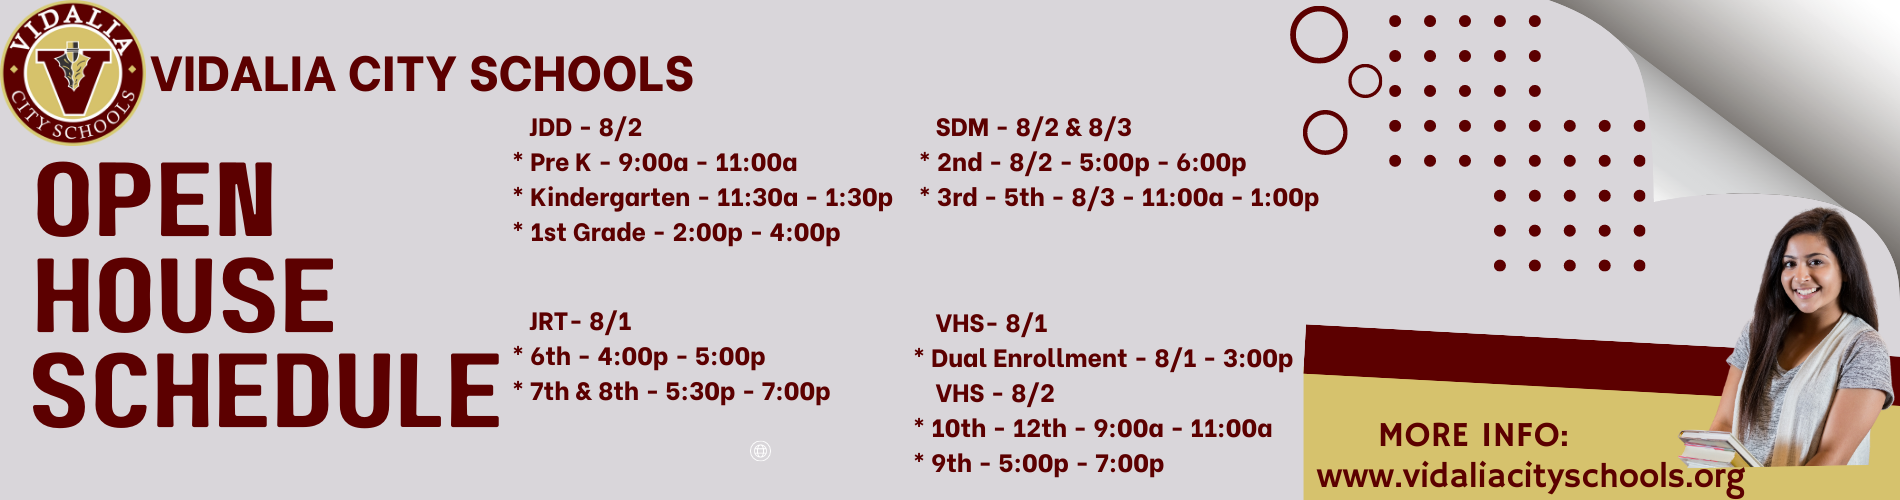 Open House Banner with Dates and Times